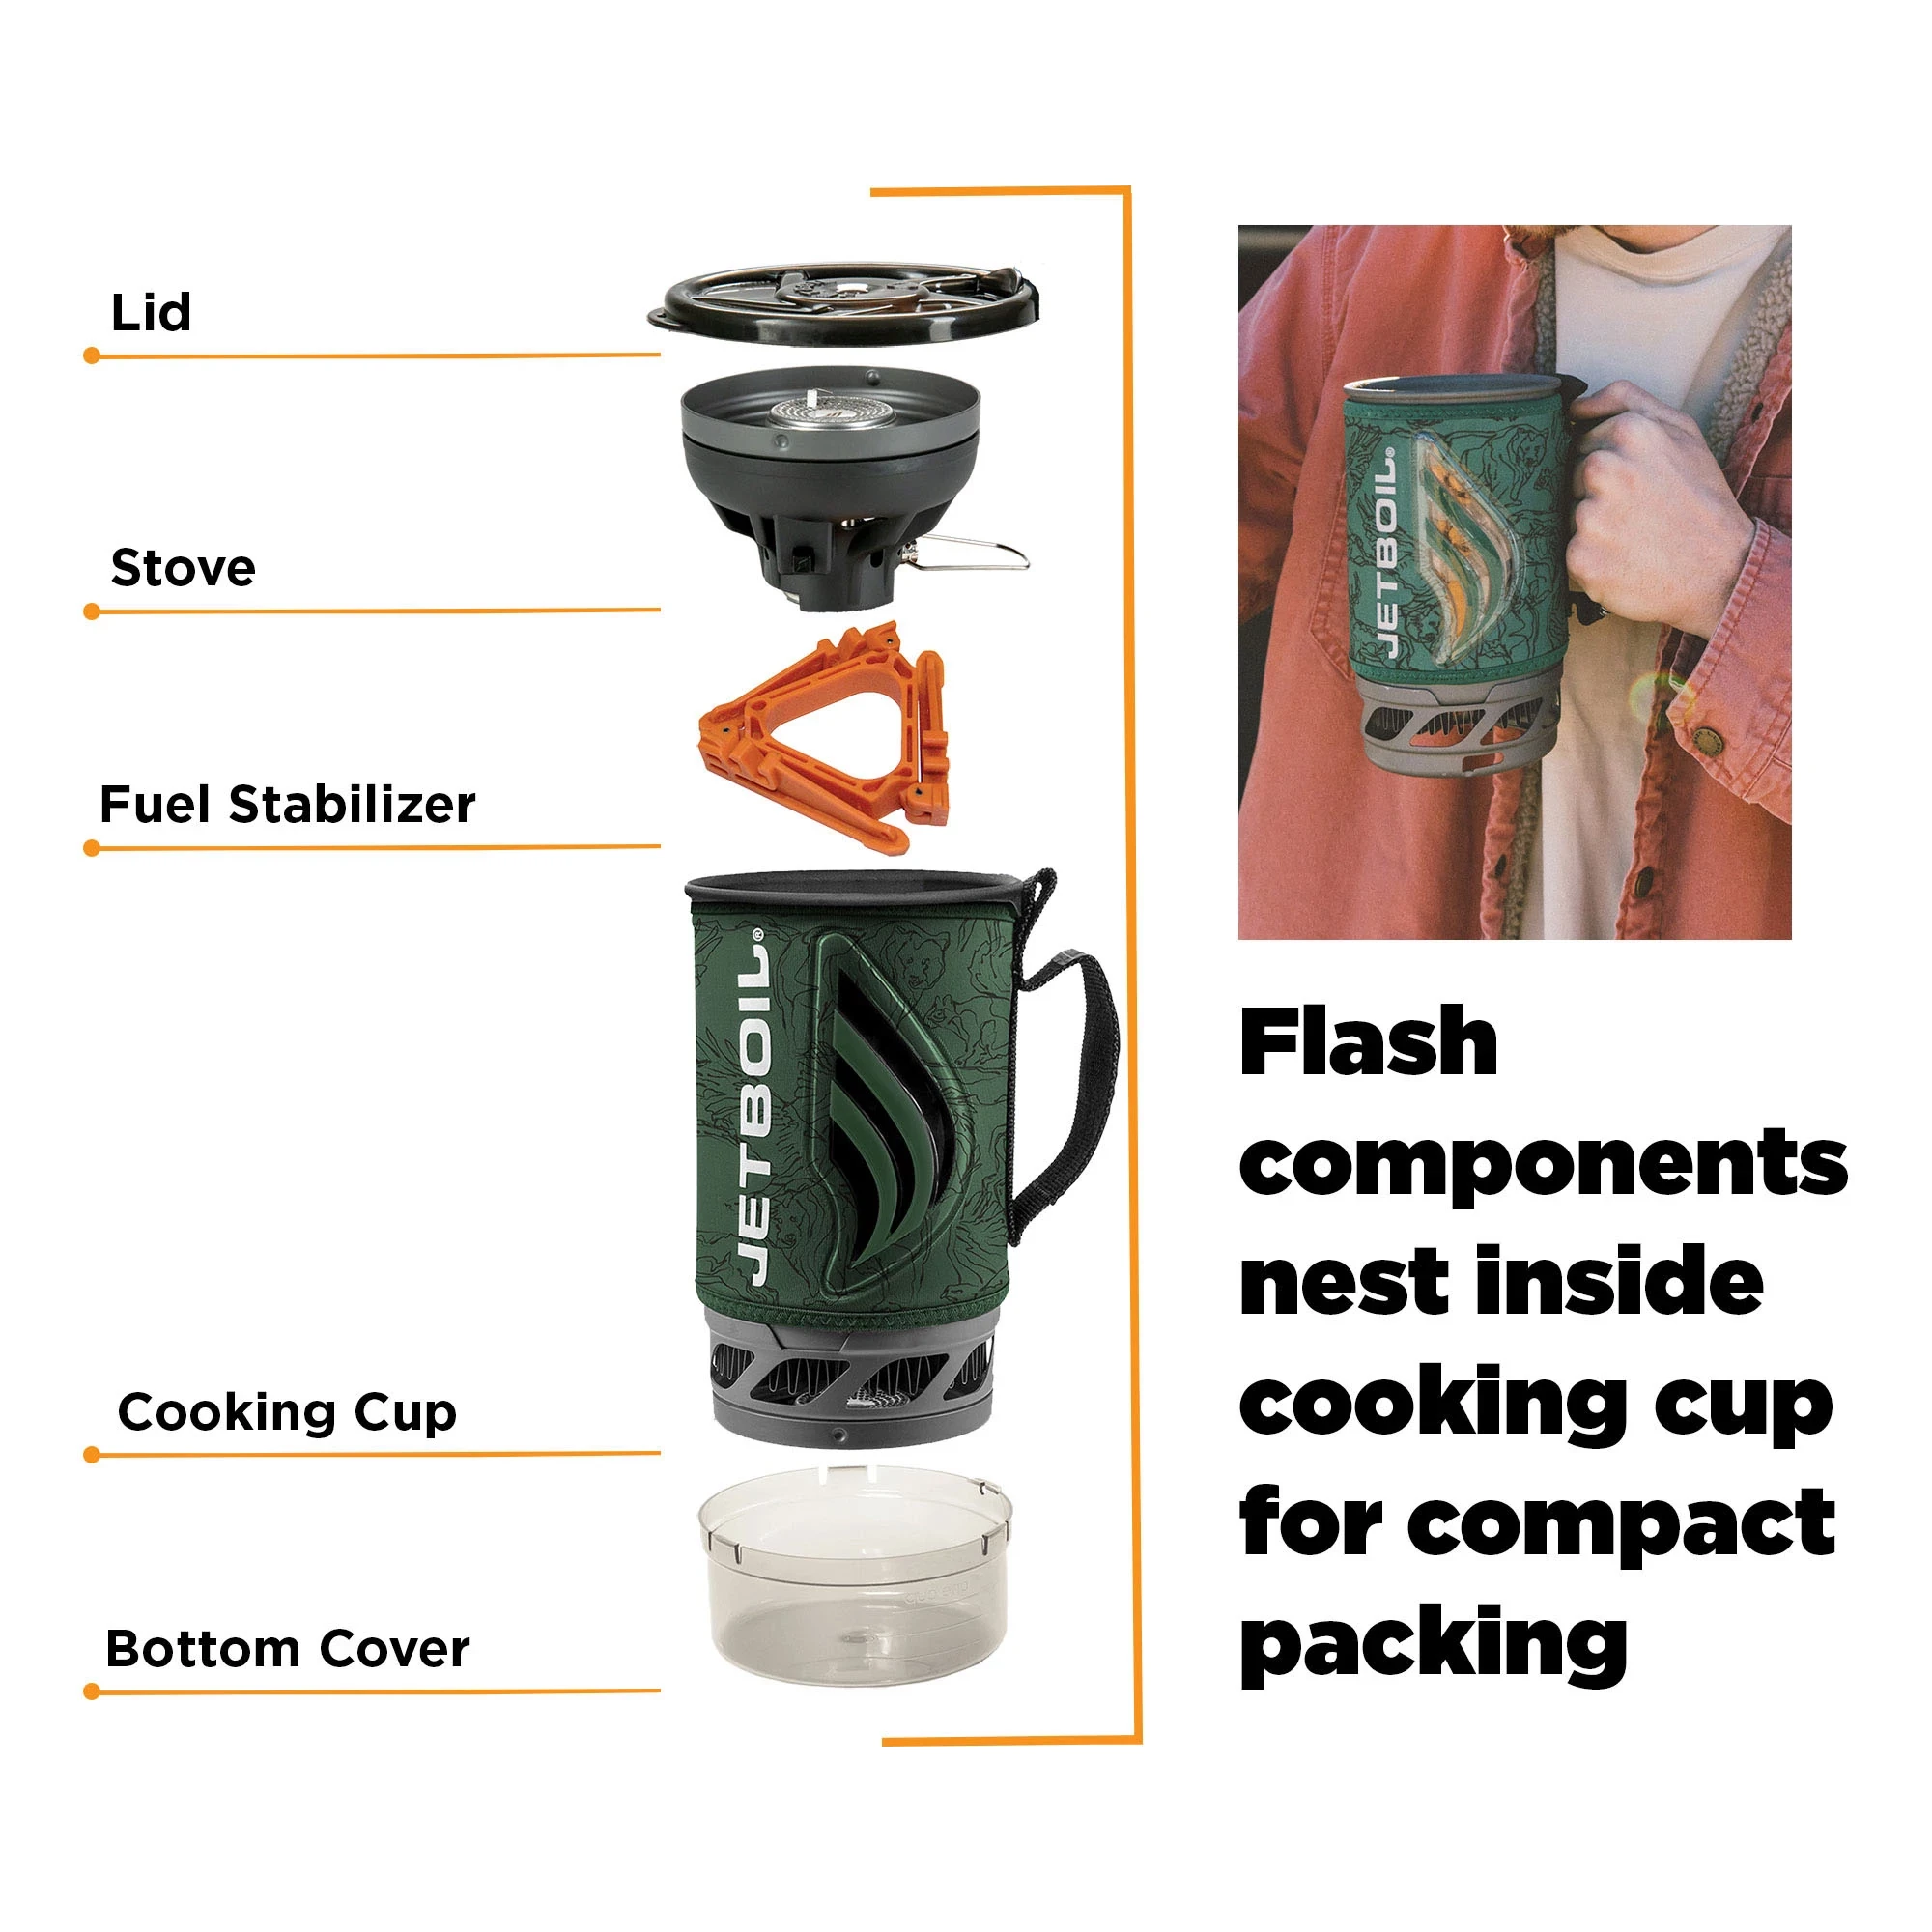 Flash Packability Infographic